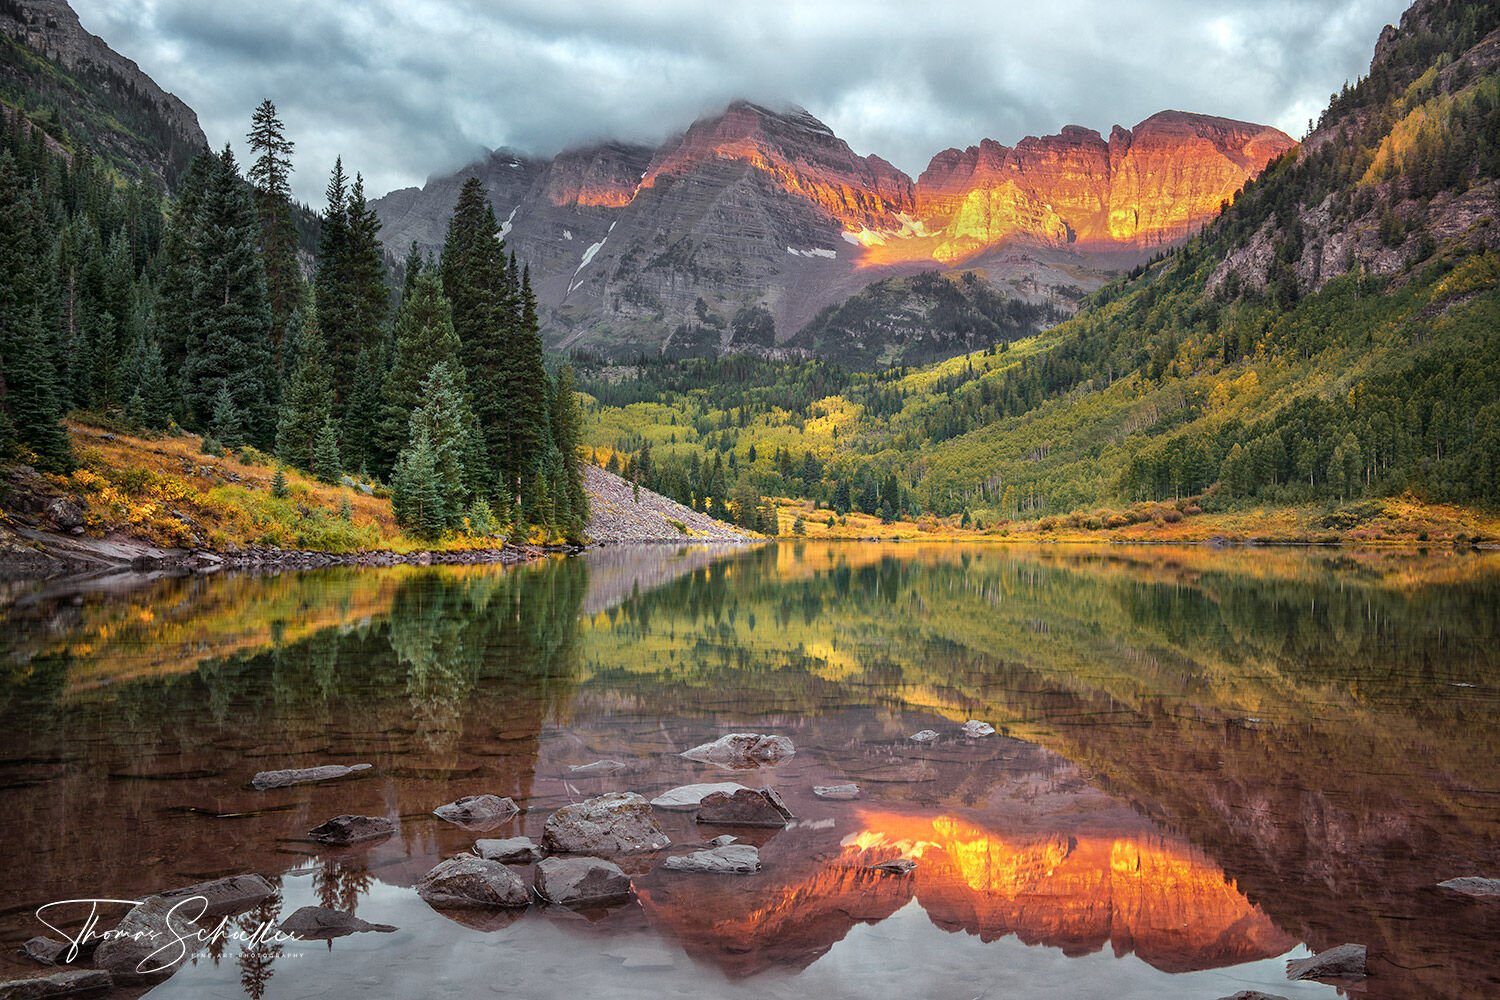 Stunning autumn sunrise at the Maroon Bells reflected off the calm surface of Maroon lake | Snowmass Wilderness Colorado